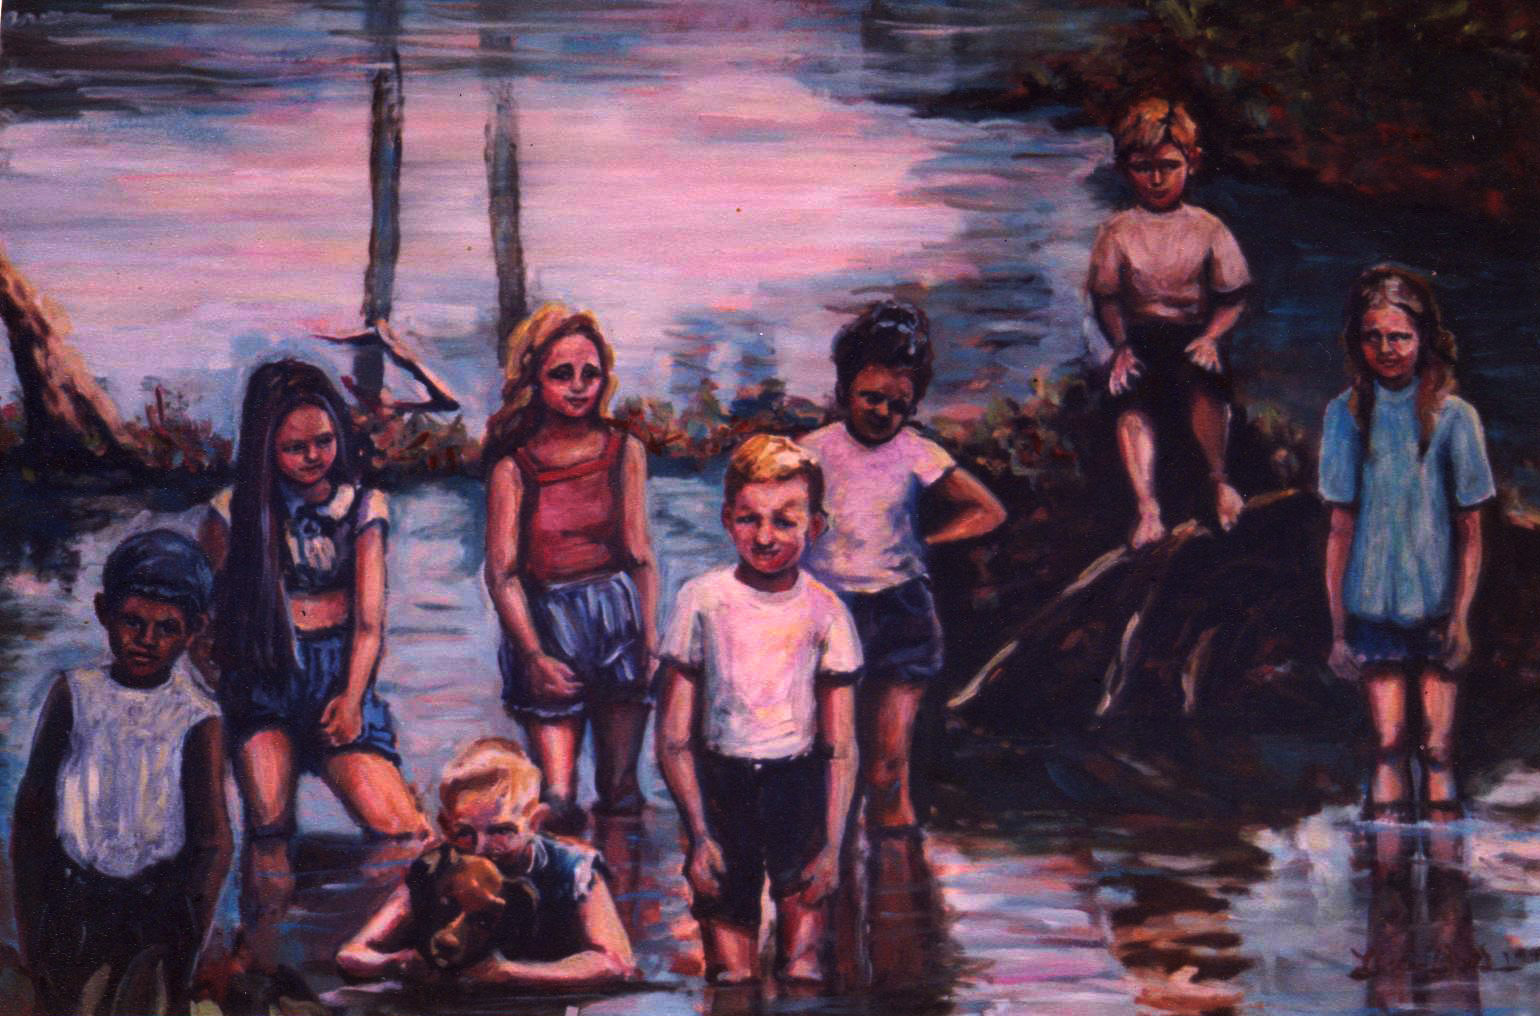 Commission oil painting for The Children's Runaway Society of Jackson, Michigan 1994 Art By Lisabelle Oil on wood 24x36"